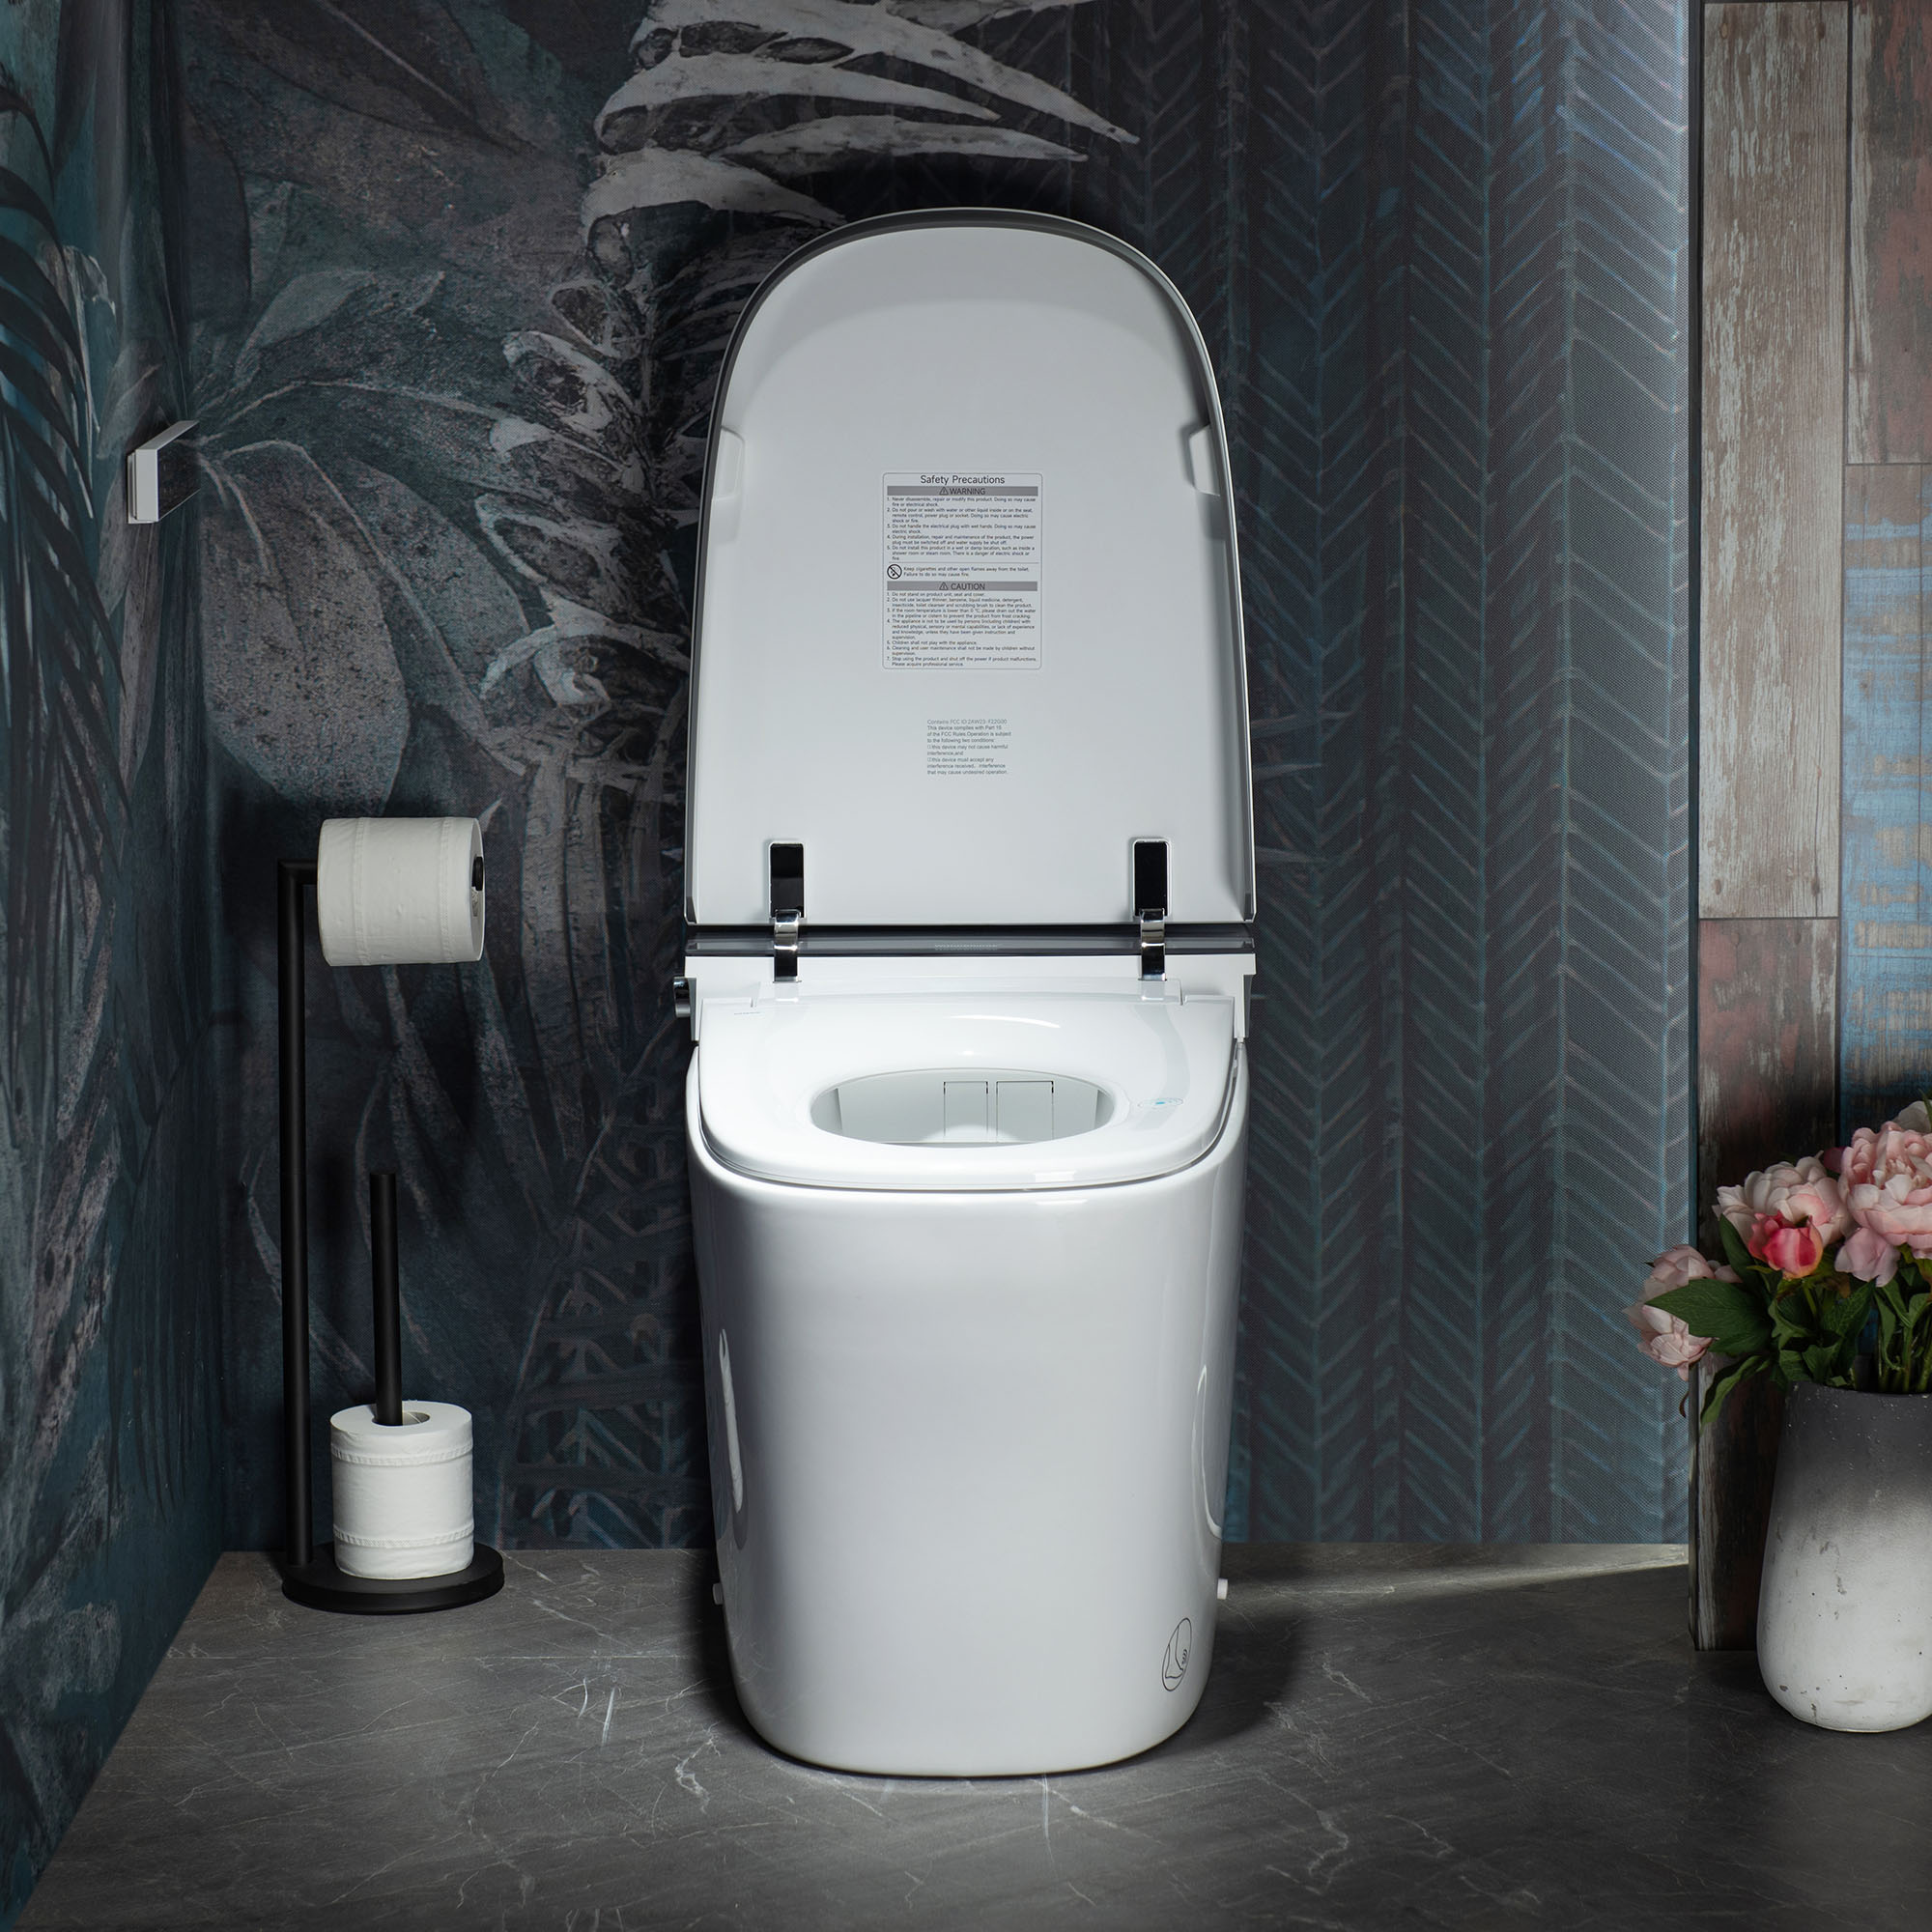  WOODBRIDGE B-0930S 1.6/1.1GPF Dual Flush Auto Open & Close Smart Toilet with Heated Bidet Seat, Intelligent Auto Flush, LED Temperature Display, Remote Control, Chair Height, Foot Sensor Flush and Build-In Booster Pump and Cleaning Foam Dispenser_12616